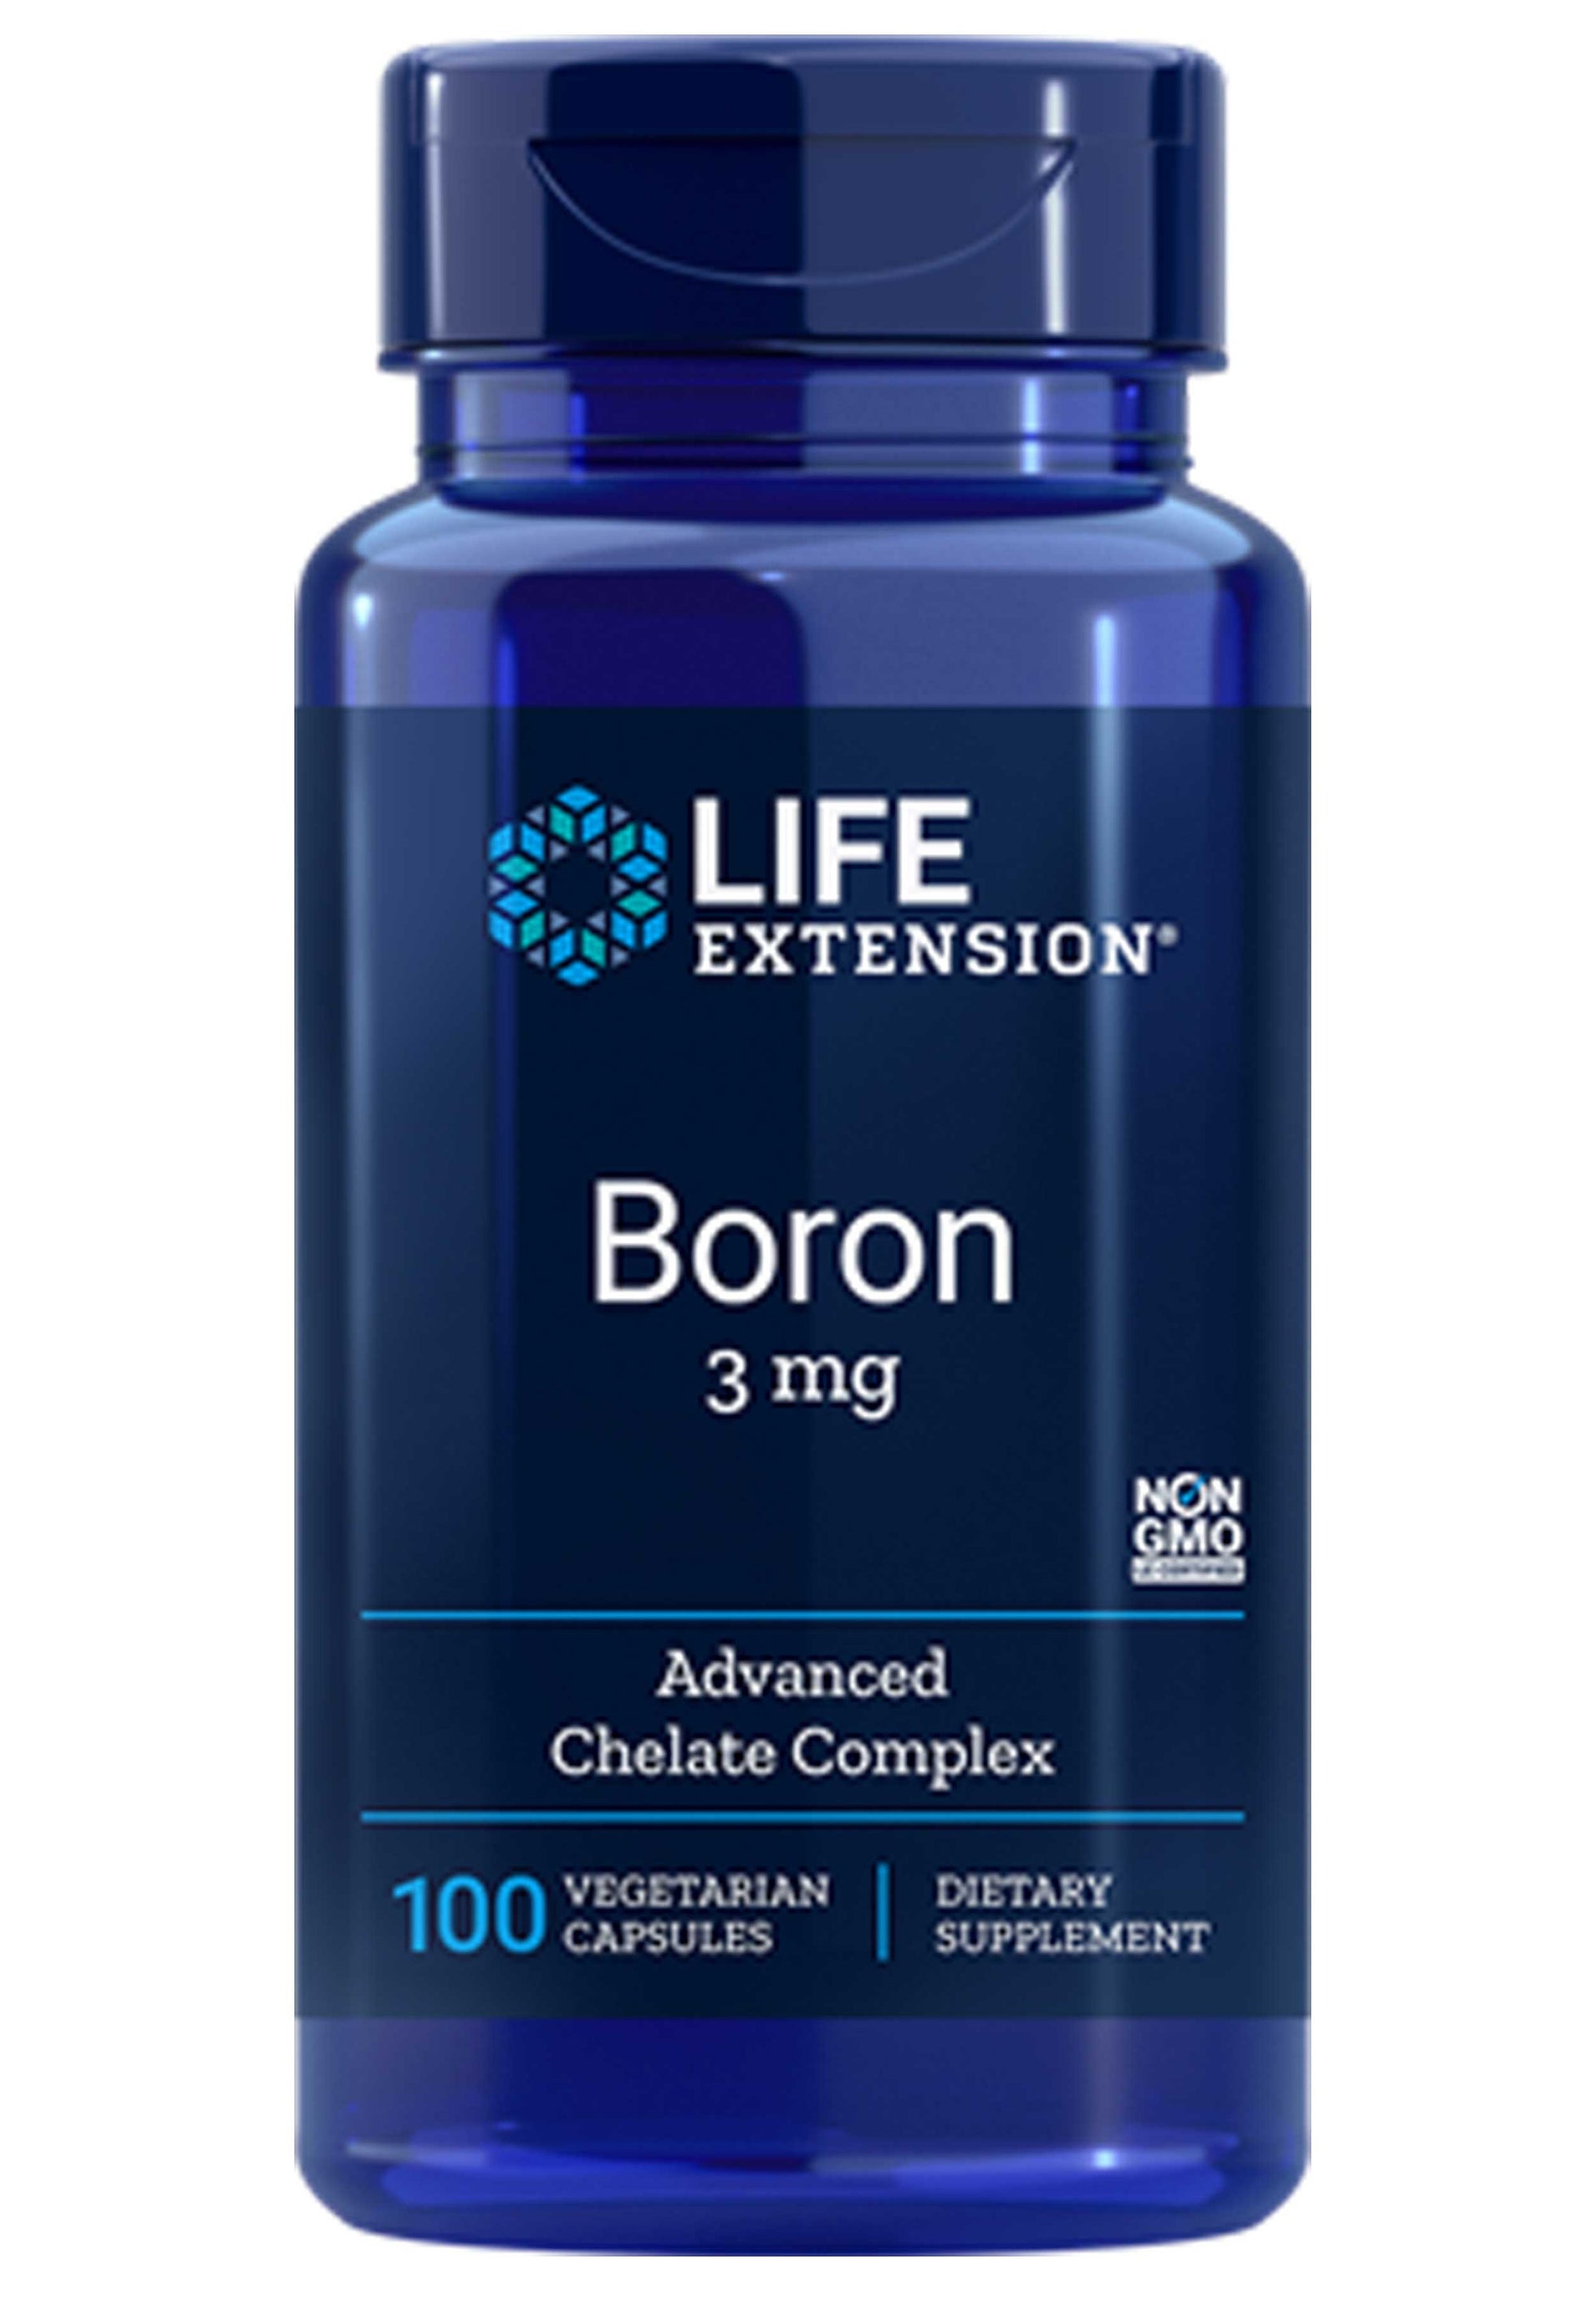 Life Extension Boron Supplement First